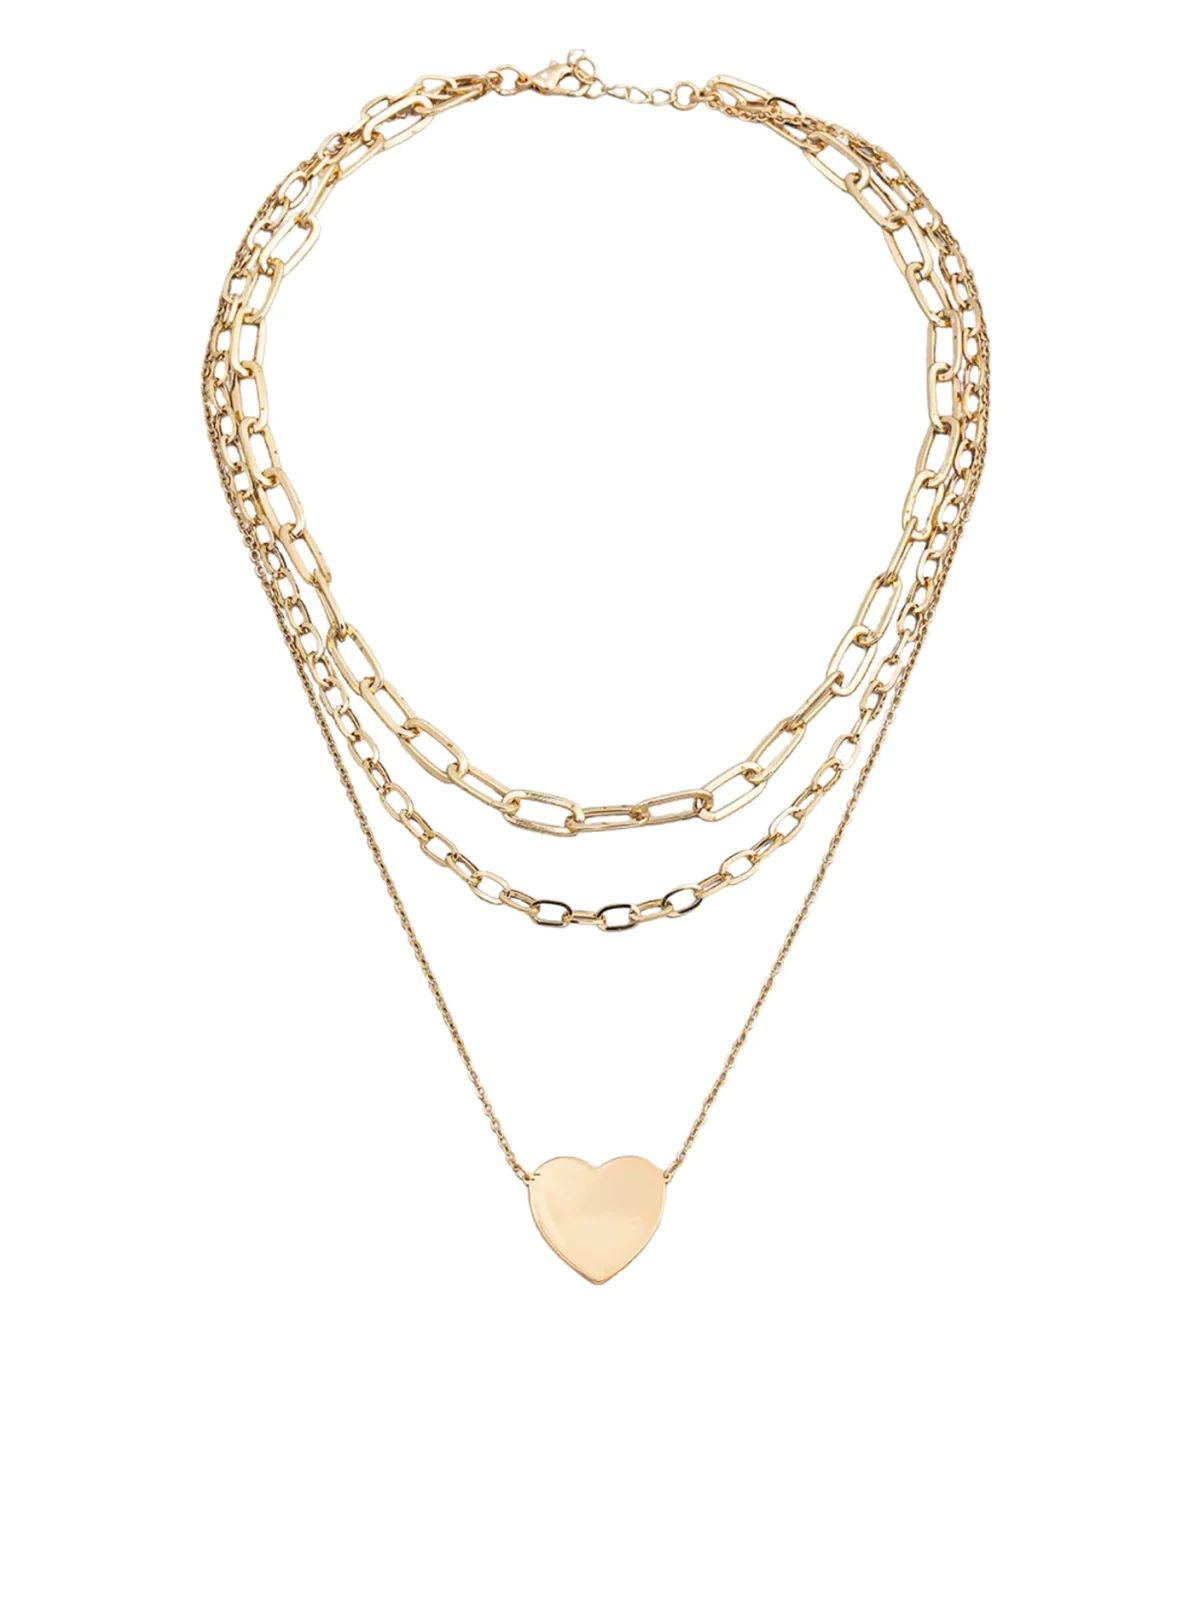 HEART OF GOLD LAYERED NECKLACE | Judith March